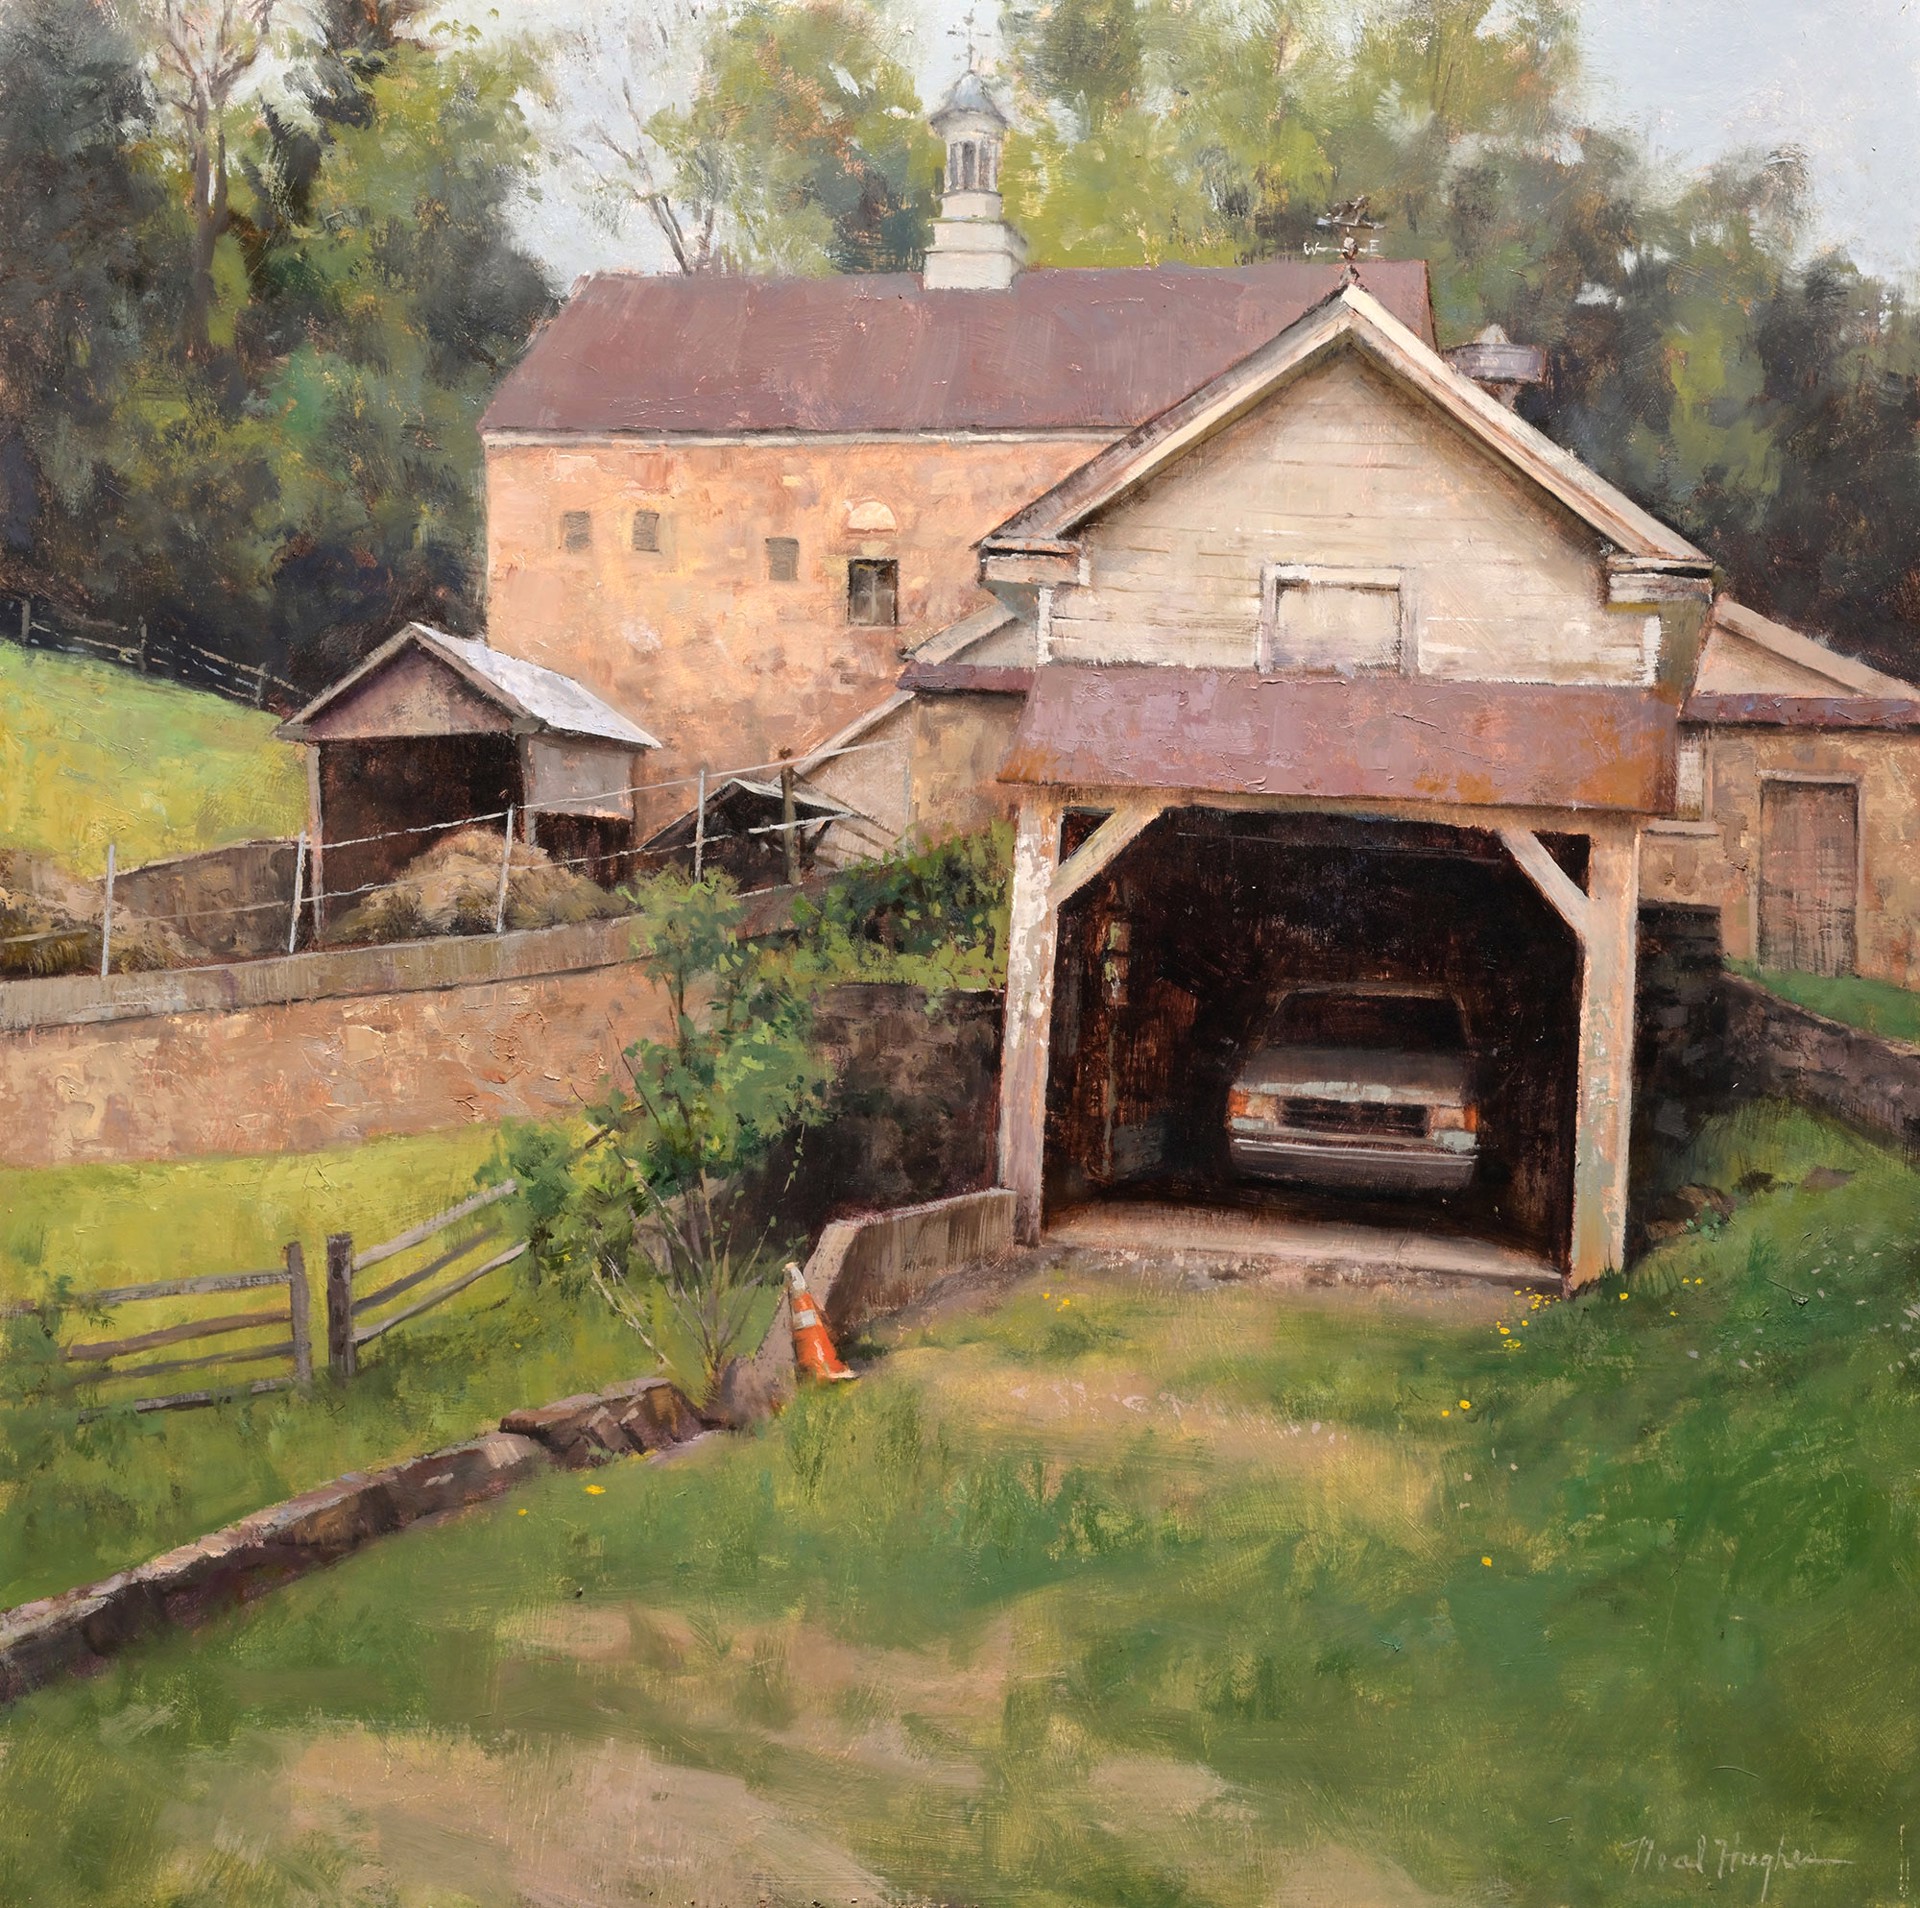 Neal Hughes "Ardrossan Barns" by Oil Painters of America